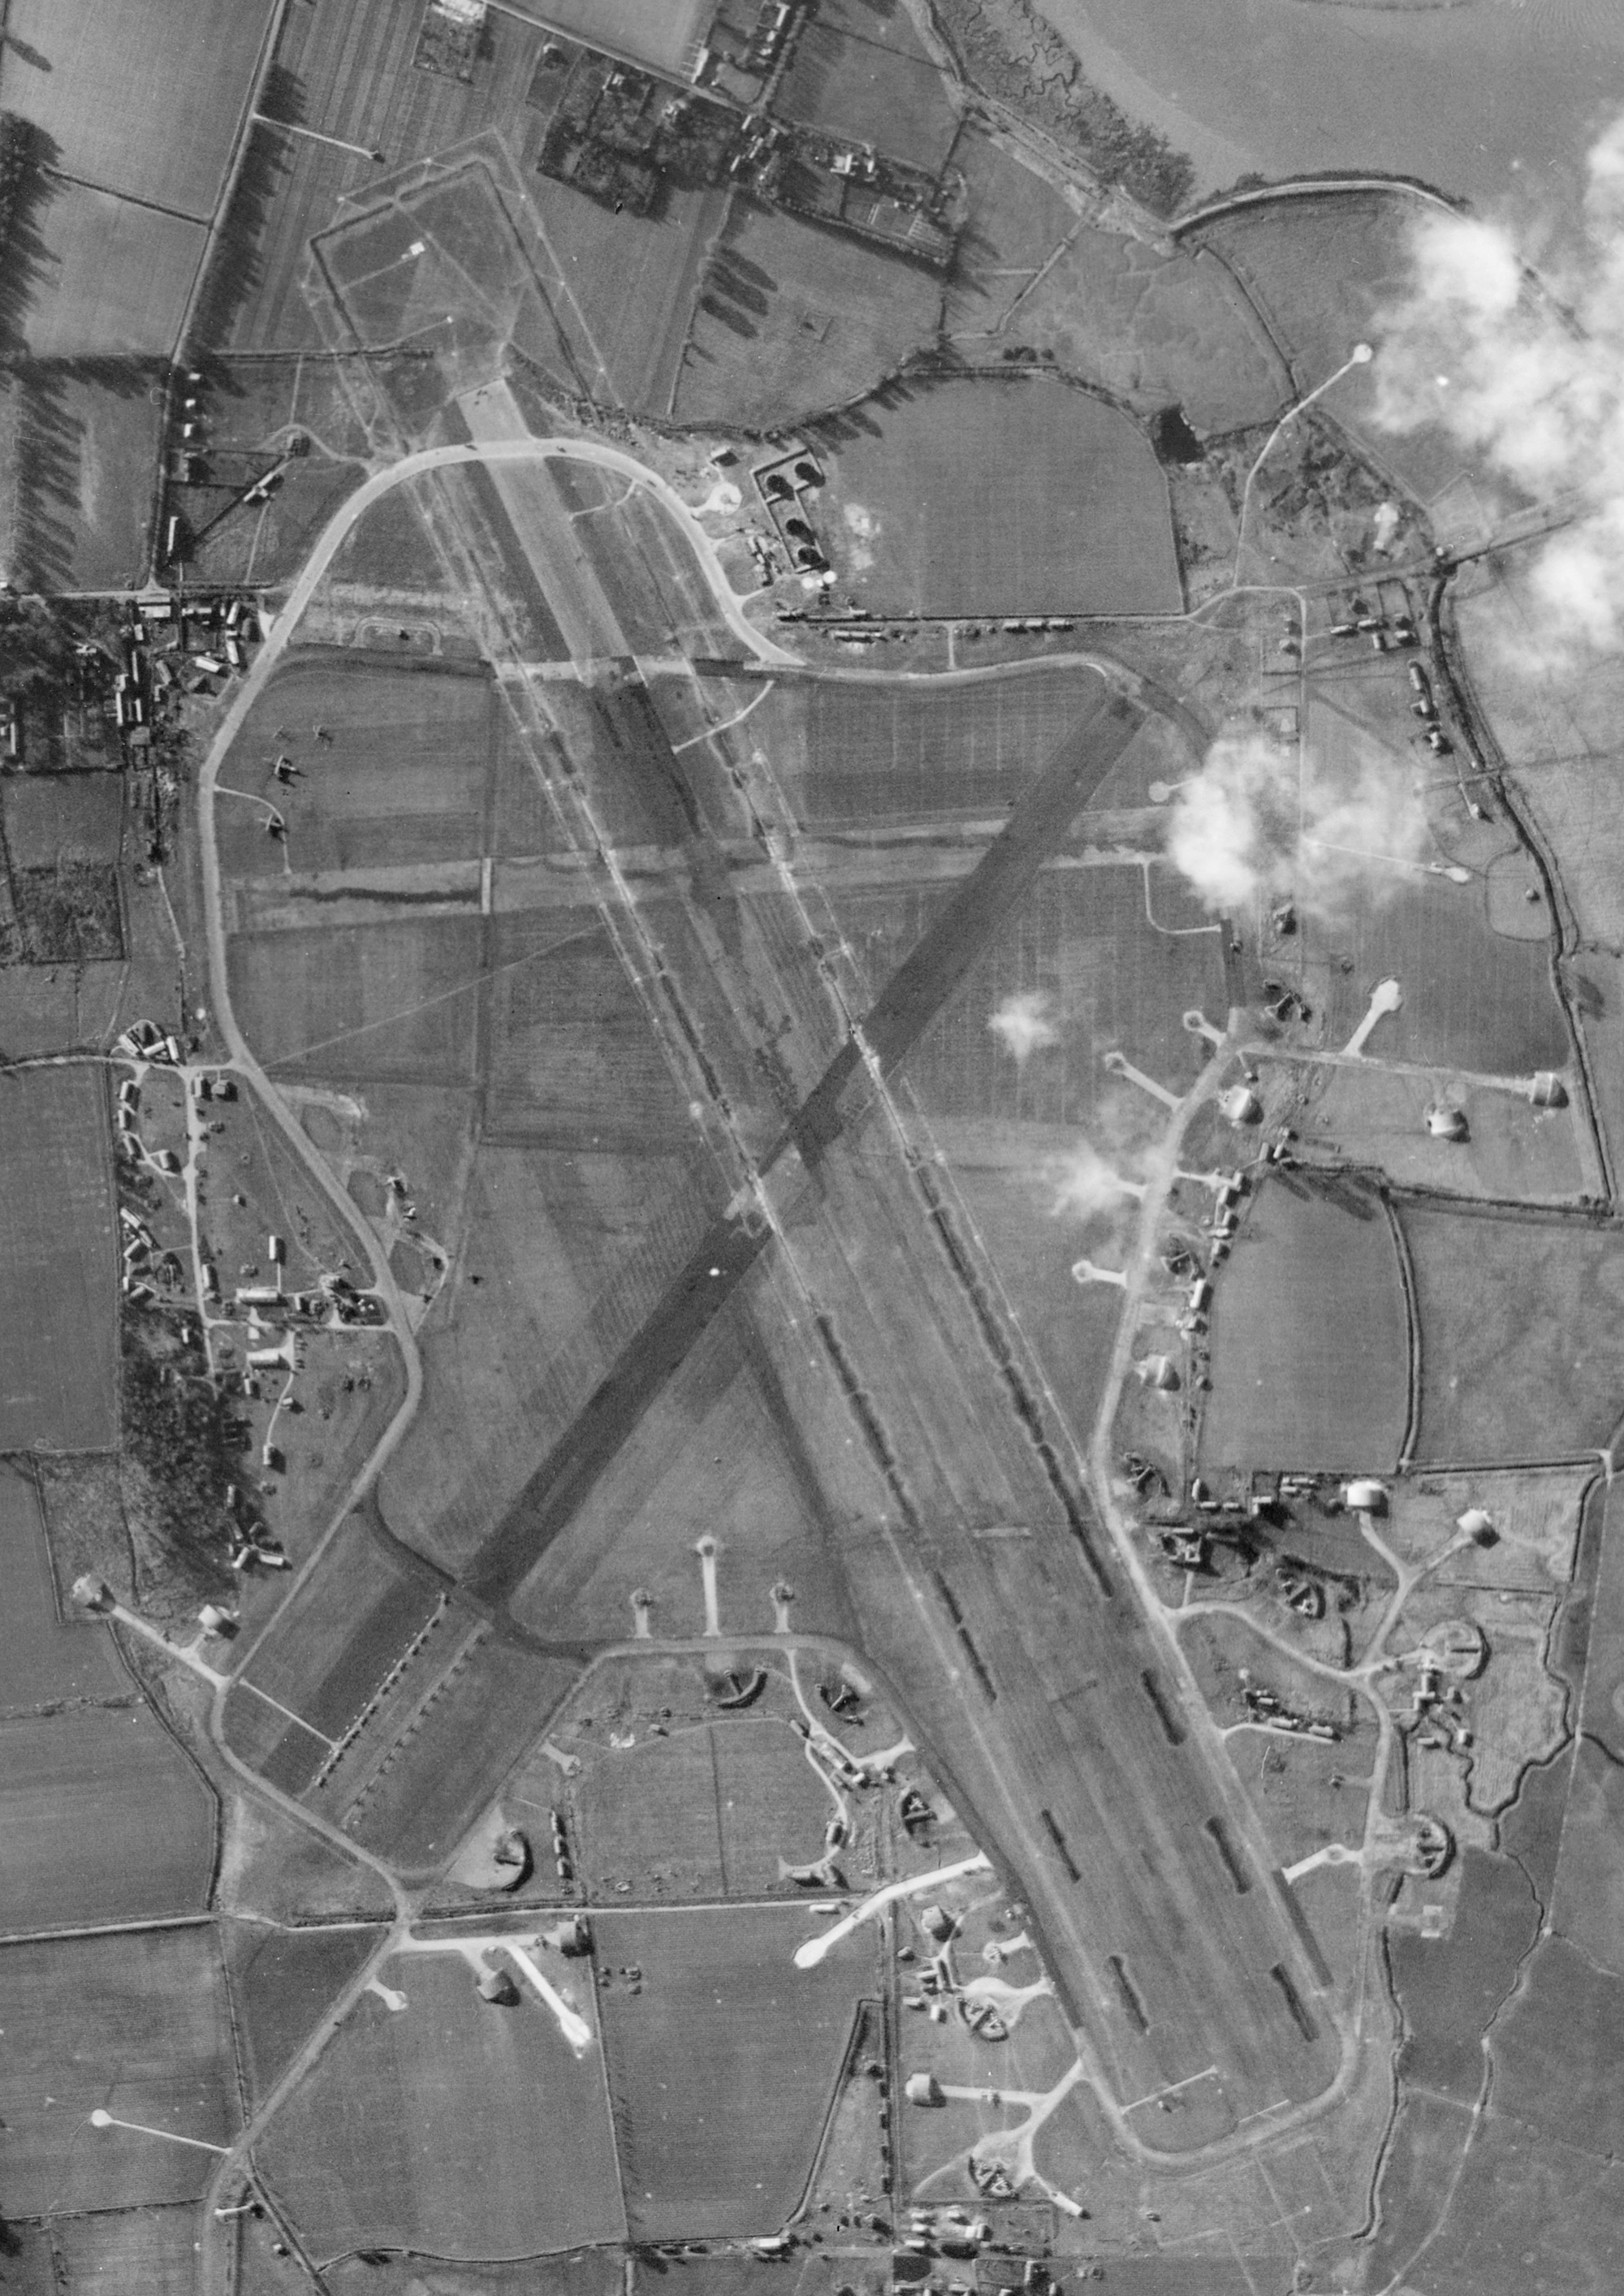 A black and white vertical aerial photograph showing an airfield with three runways. Dispersal areas with hardstands protrude from an irregular perimeter road.